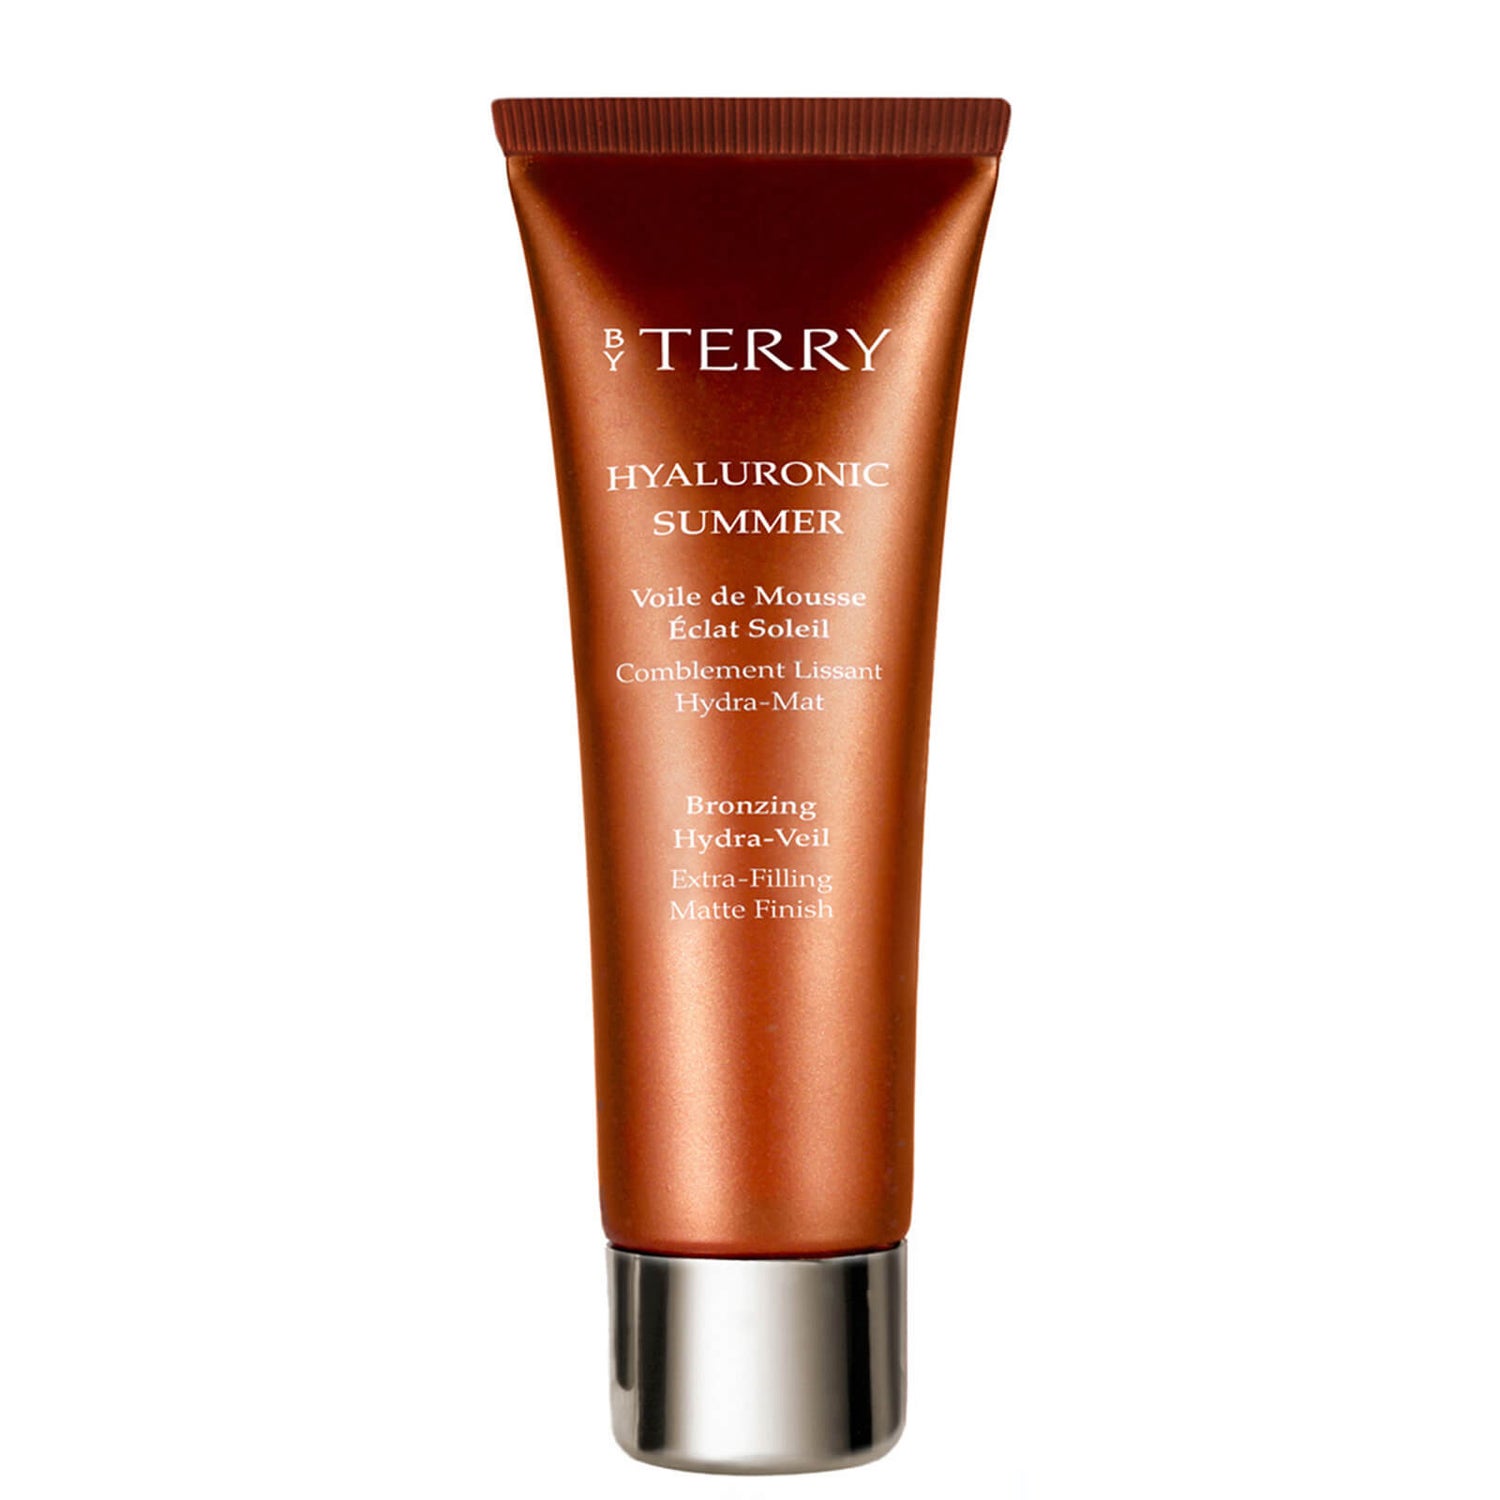 BY TERRY Hyaluronic Summer